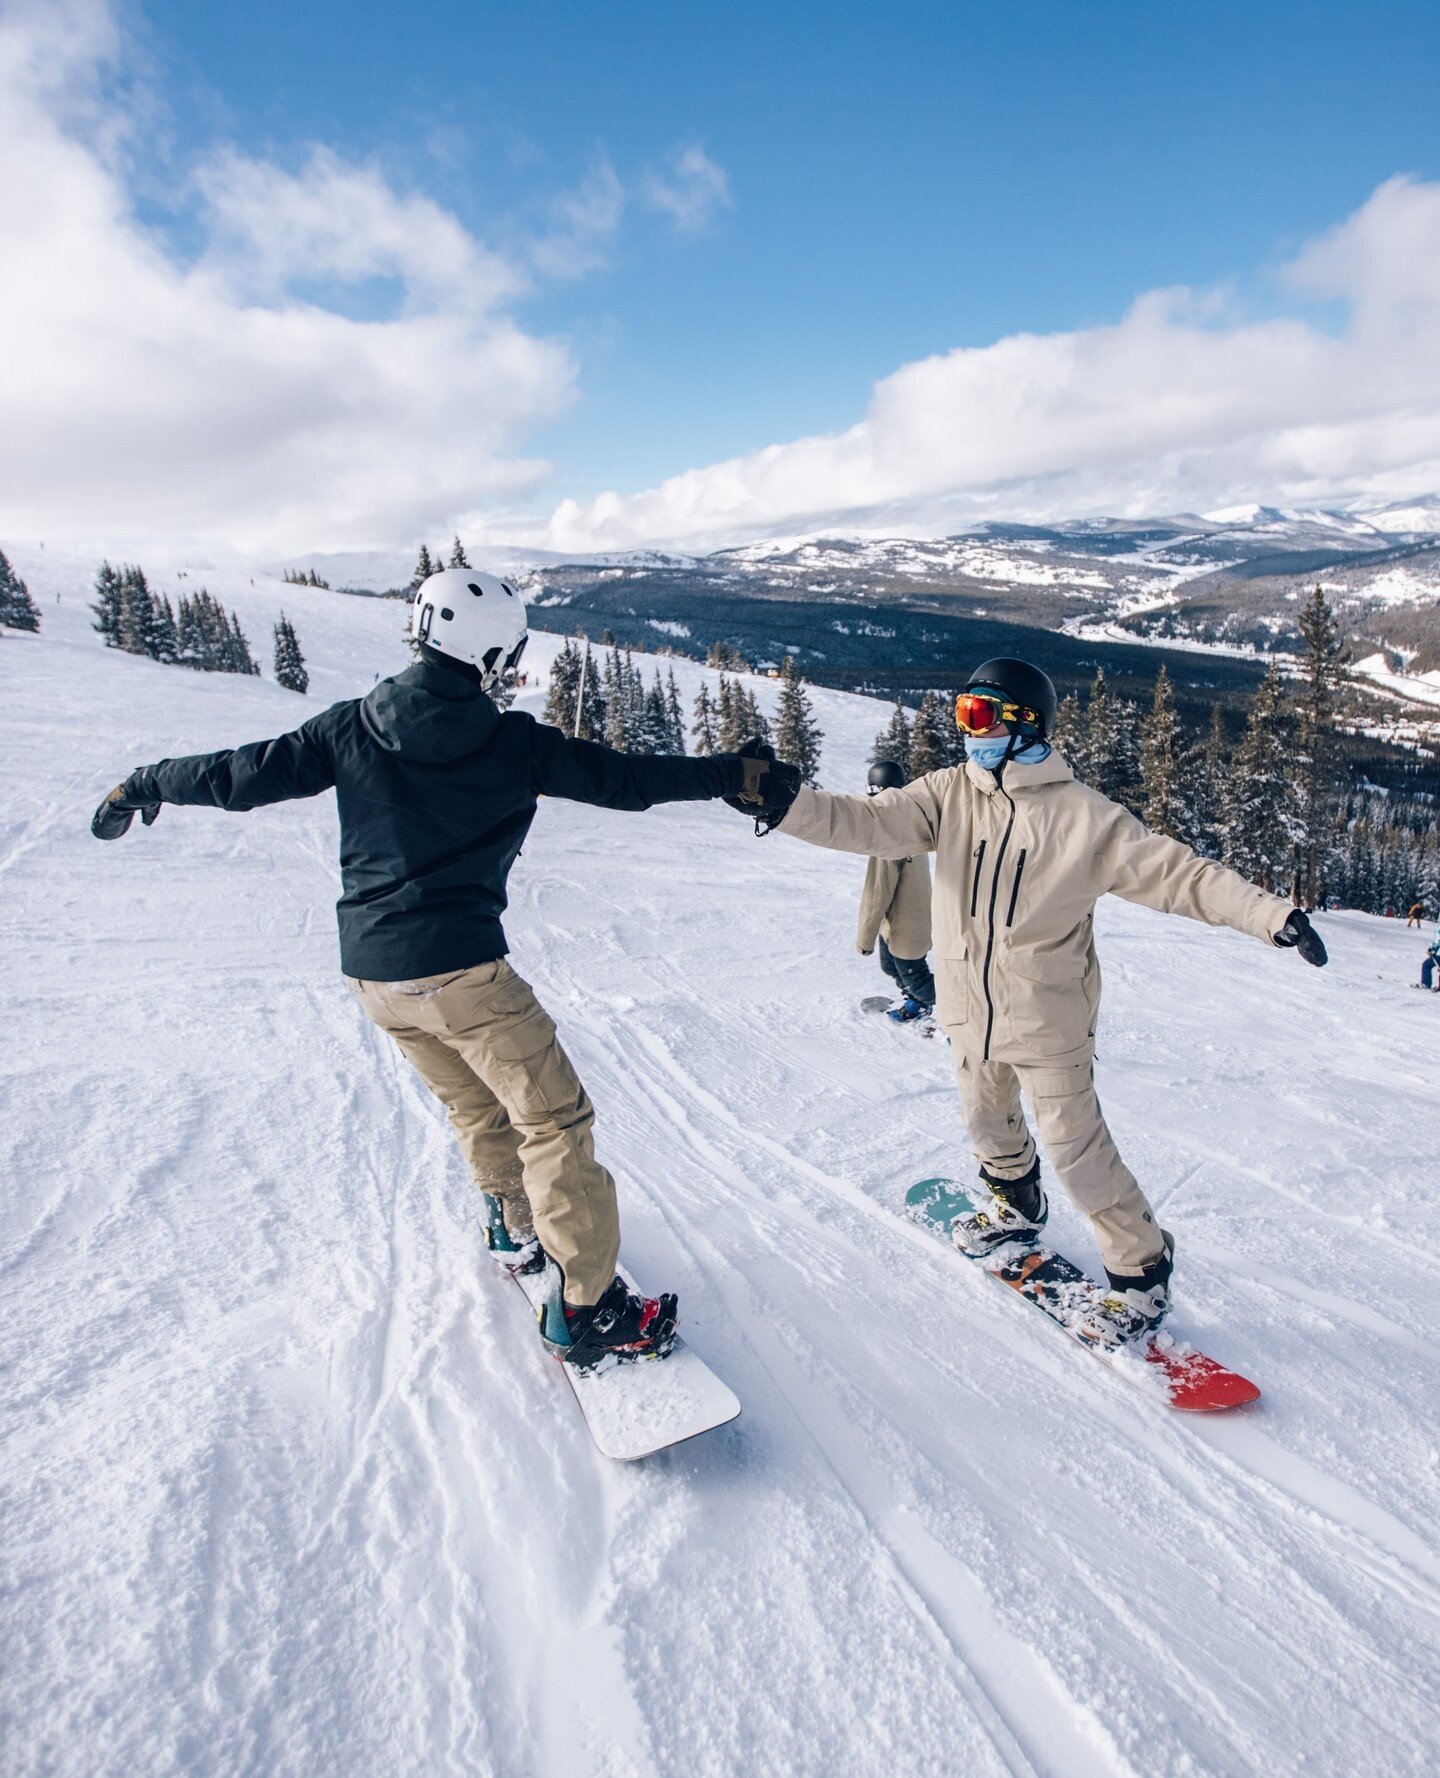 Grab your buddies, let's plan a ski trip 🤝⁠
⁠
⁠
Learn how to get started at link in bio! #college #collegetravel #ski #snowboard #skiclub #skitrip #collegeskitrip #outsidelife